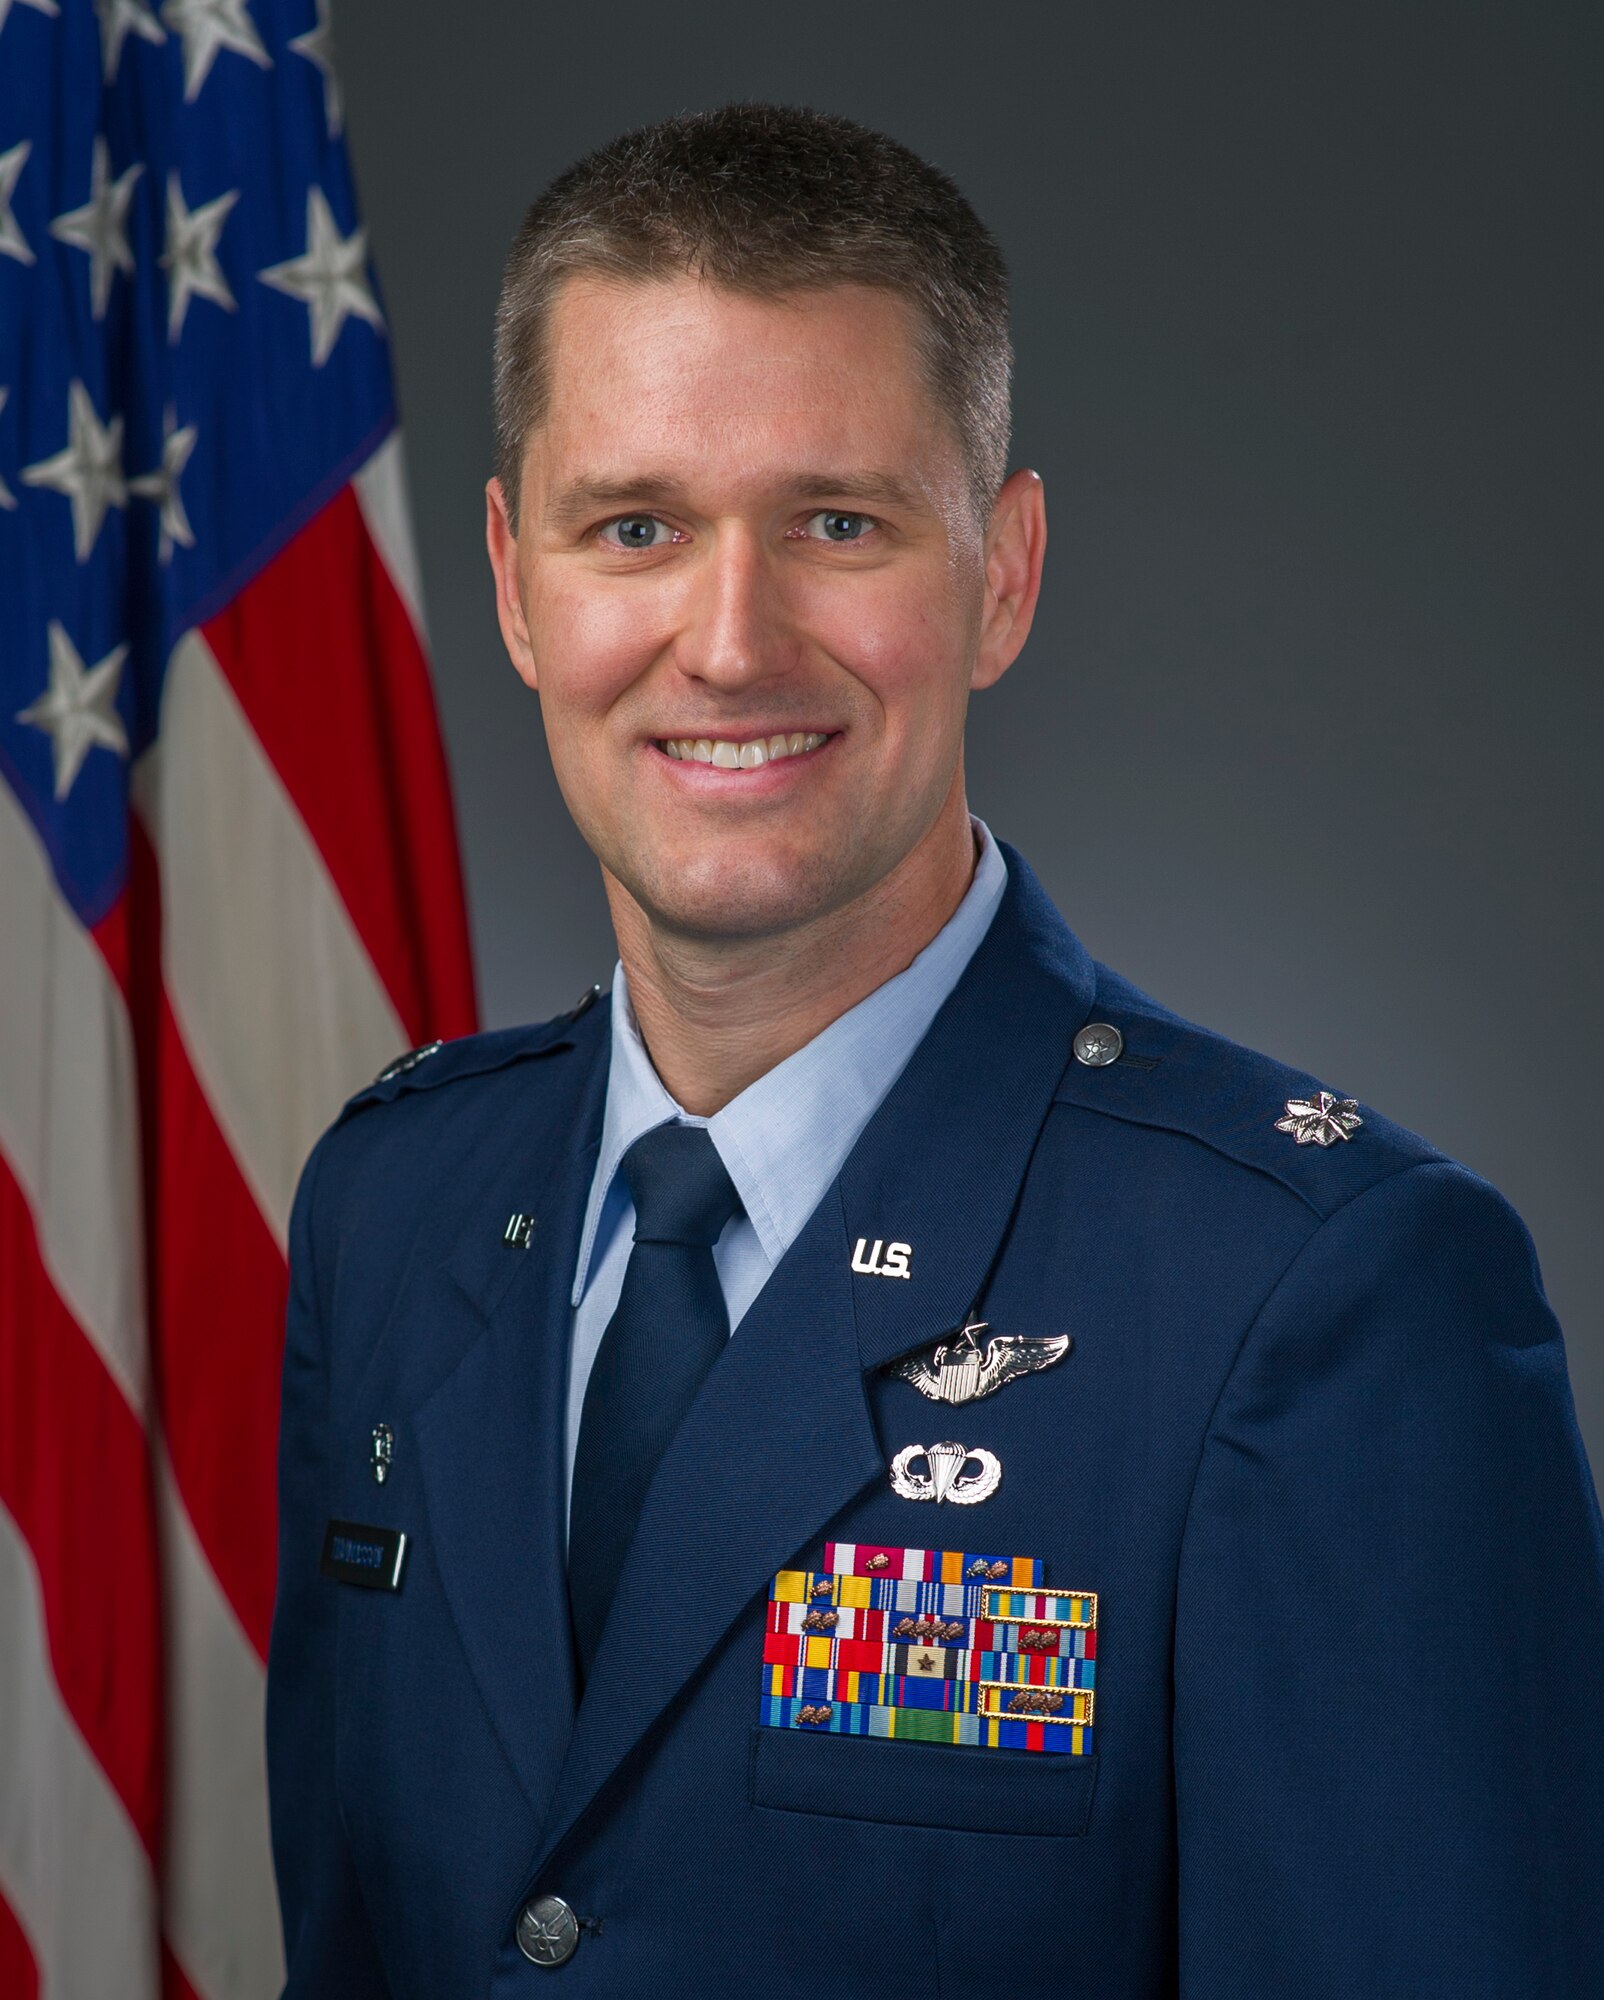 Lt. Col. Brian Thomasson, 60th Operations Squadron commander, encourages Airmen to live life in a way they would like to be remembered for. Thomasson was inspired by the example set by his grandfather who survived World War II and had a significant impact on his life. (Courtesy Photo)